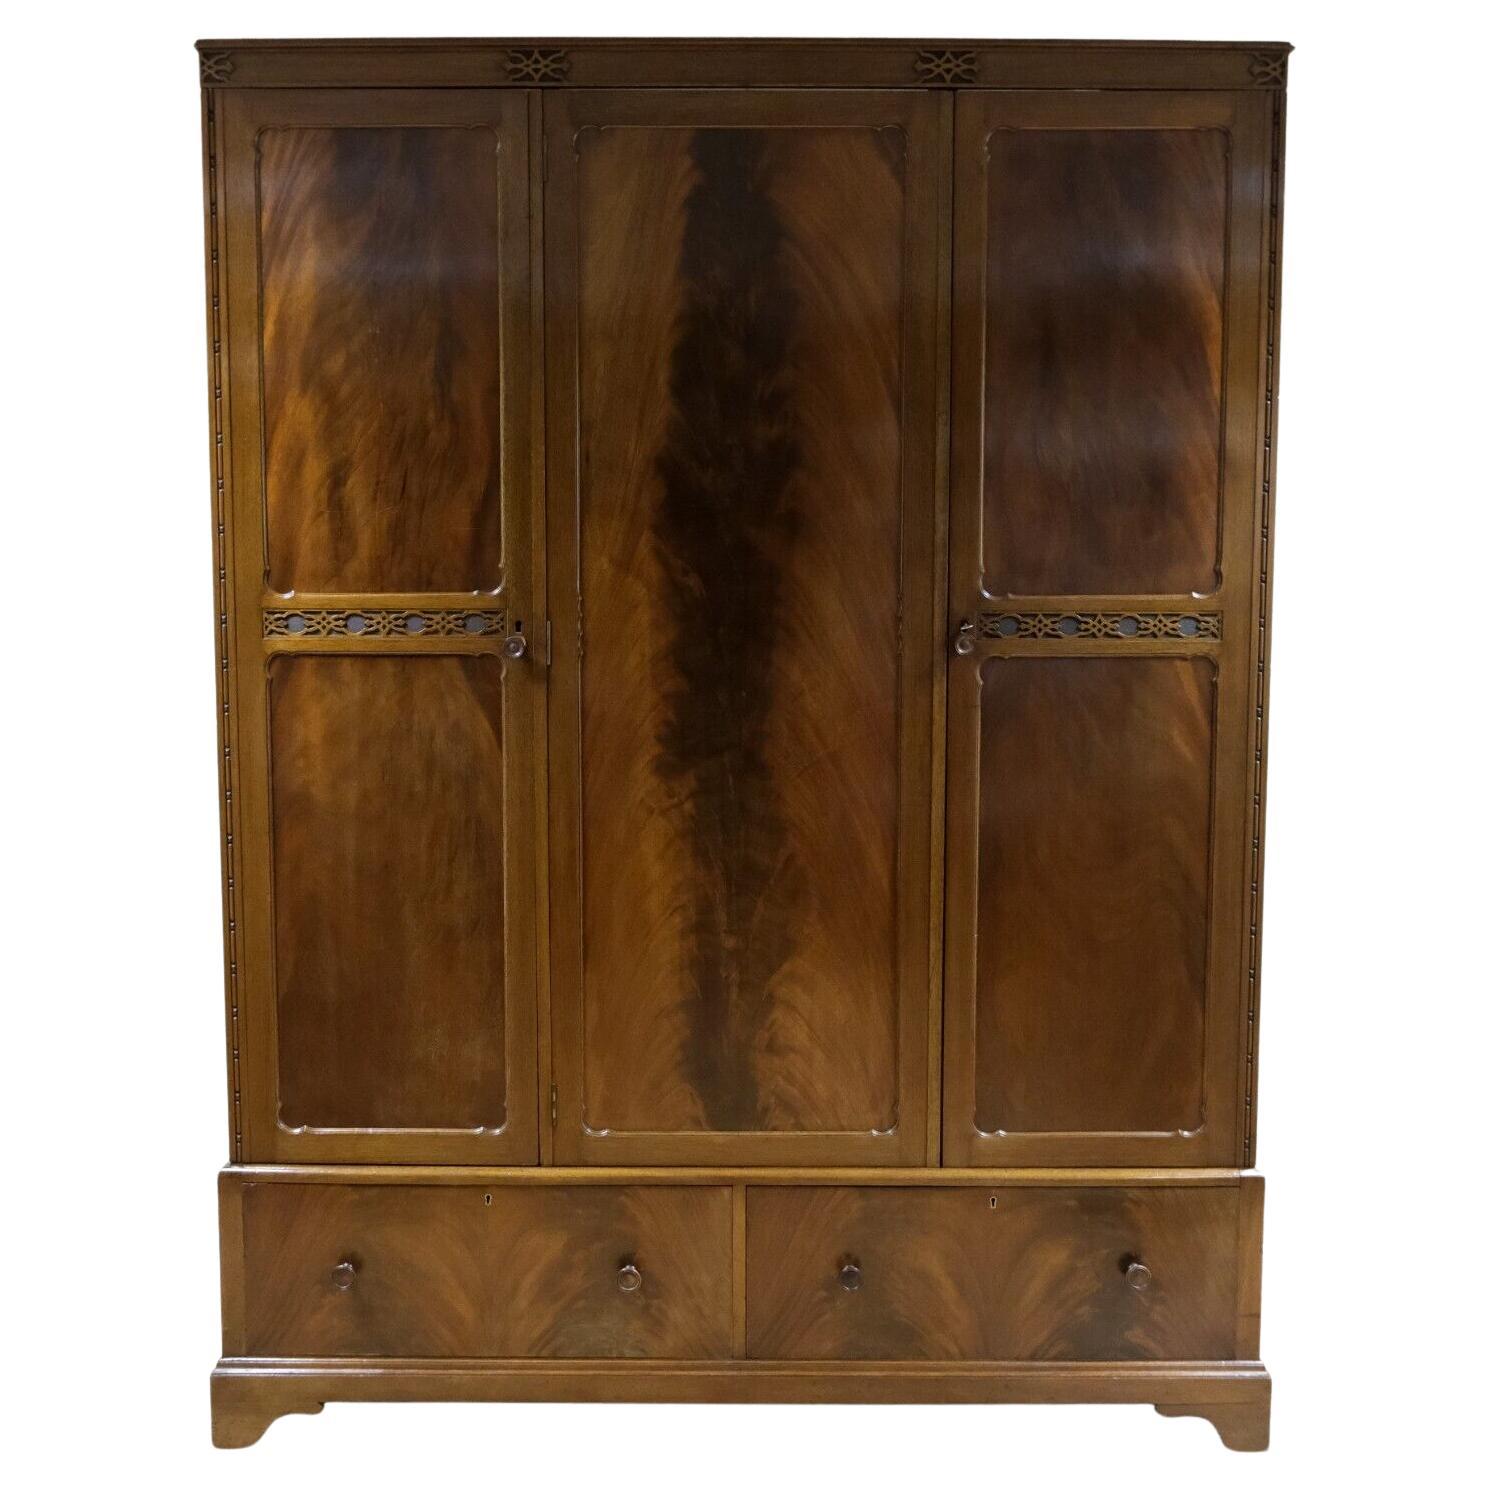 We are delighted to offer for sale this gorgeous flame Mahogany Vintage triple wardrobe with a mirror and a pair of drawers. 

This lovely triple wardrobe offers you plenty of storage. Behind the double and single doors, there is a good length,